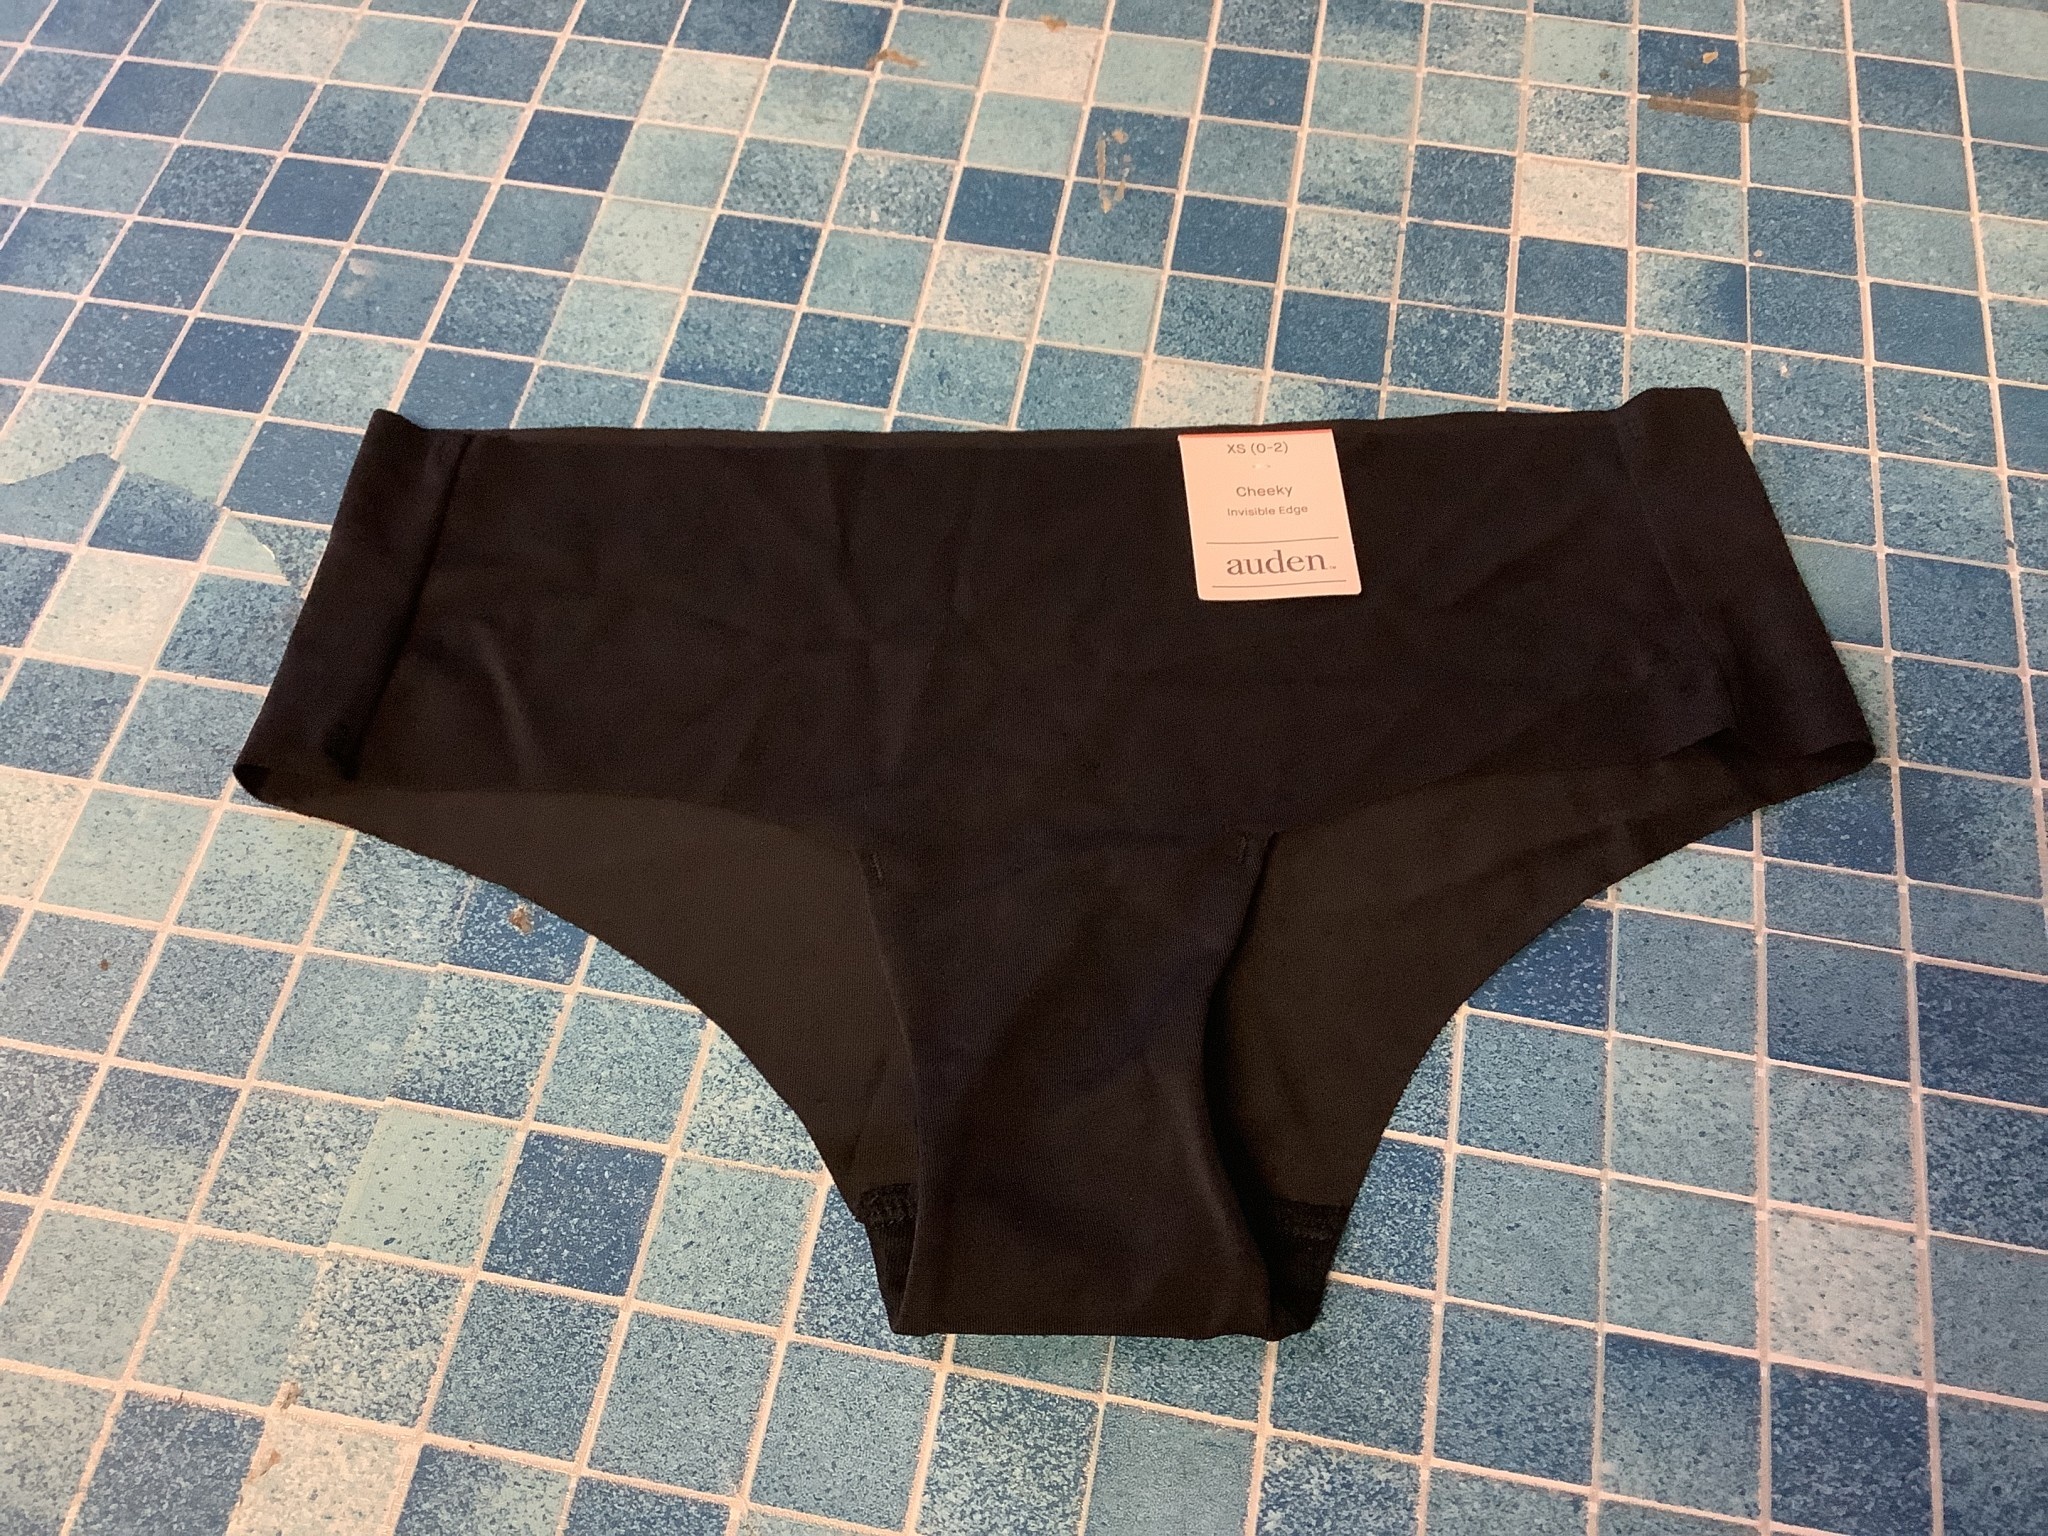 11 Auden Panties L 12/14 Solids Invisible Edge Cheeky/Thong/Lace & Cotton  Cheeky